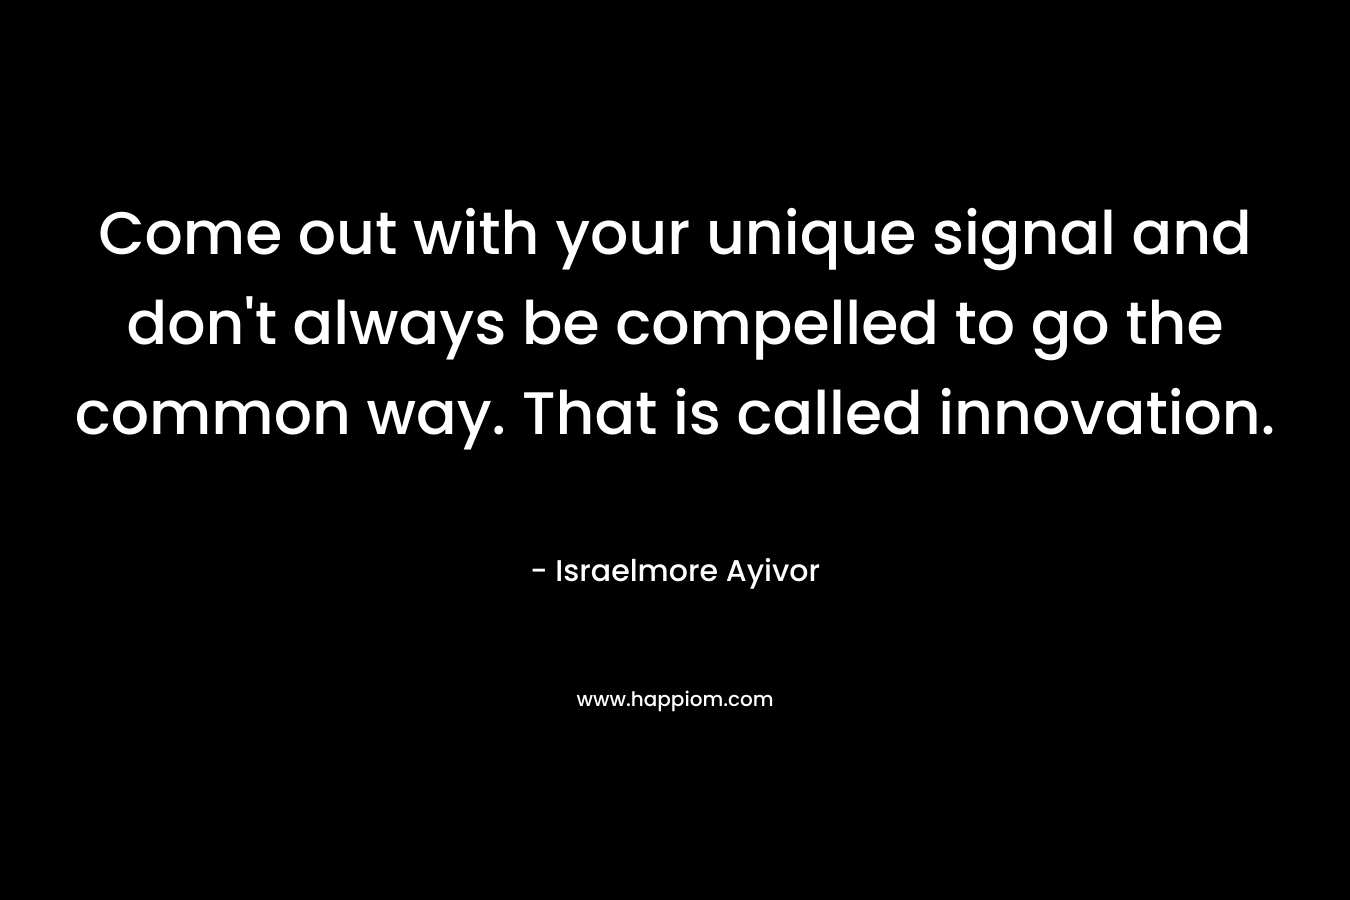 Come out with your unique signal and don't always be compelled to go the common way. That is called innovation.